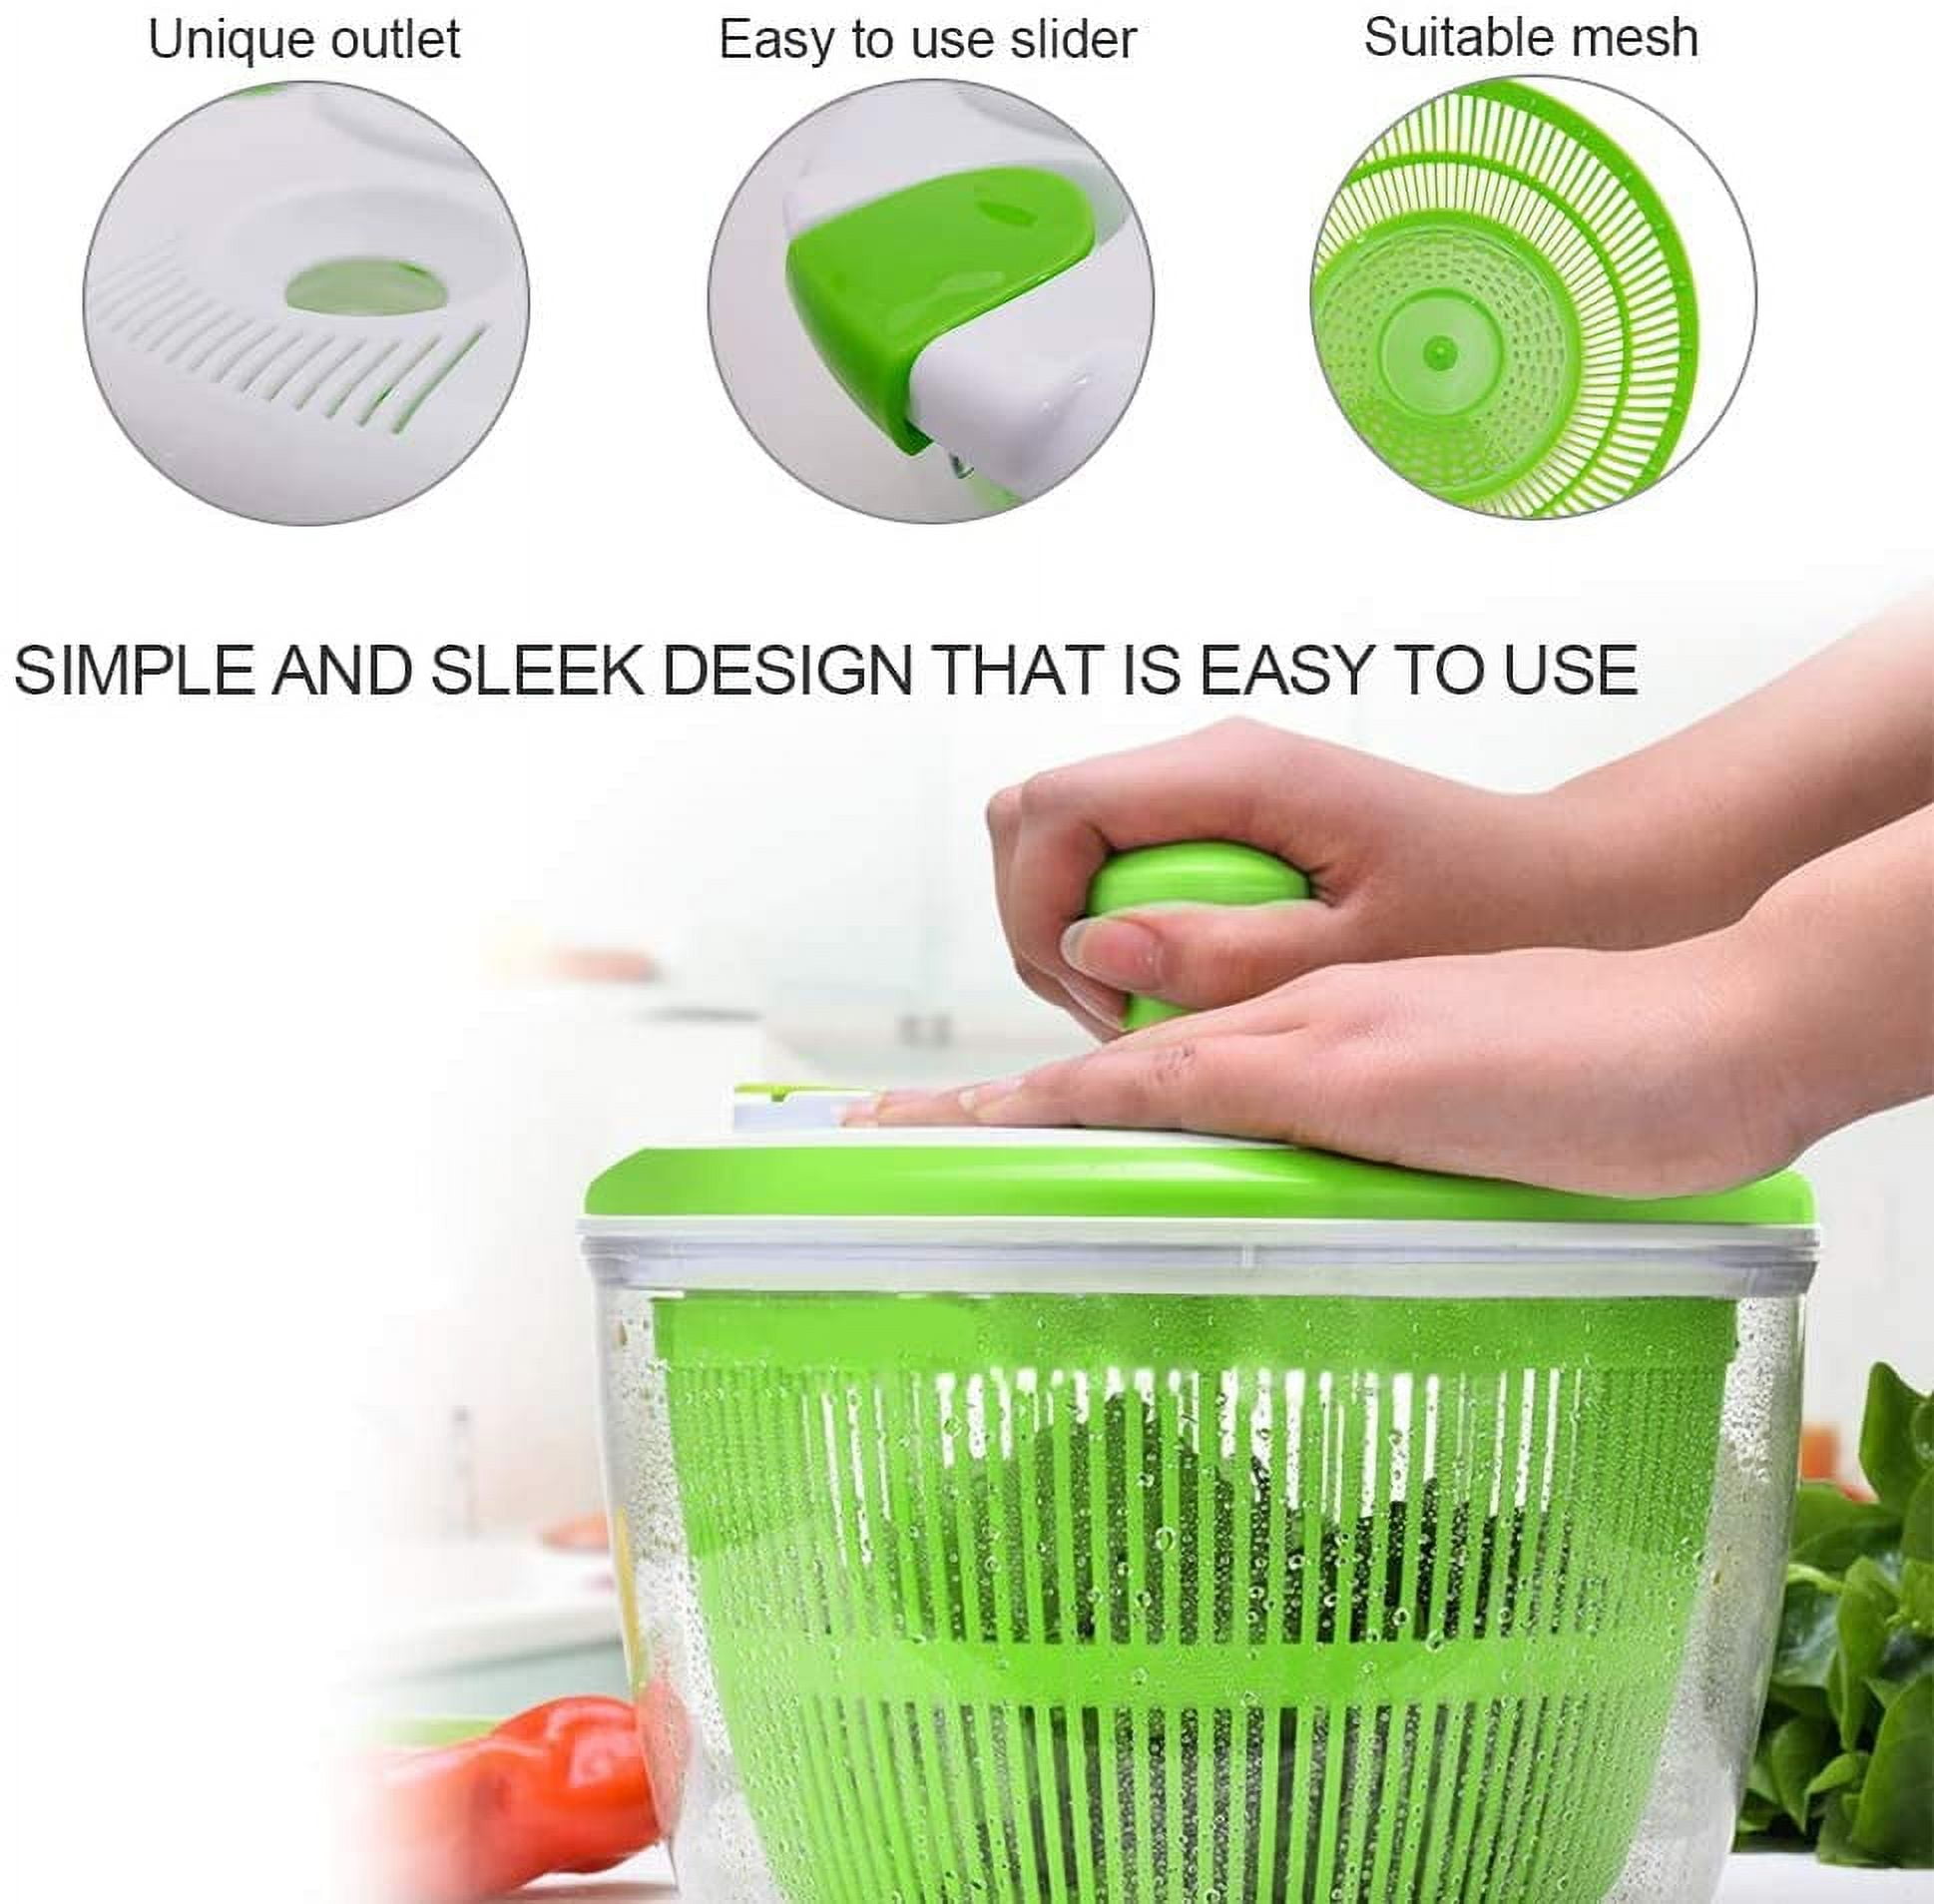 Joined Large Salad Spinner with Storage Lid, Drain, Bowl